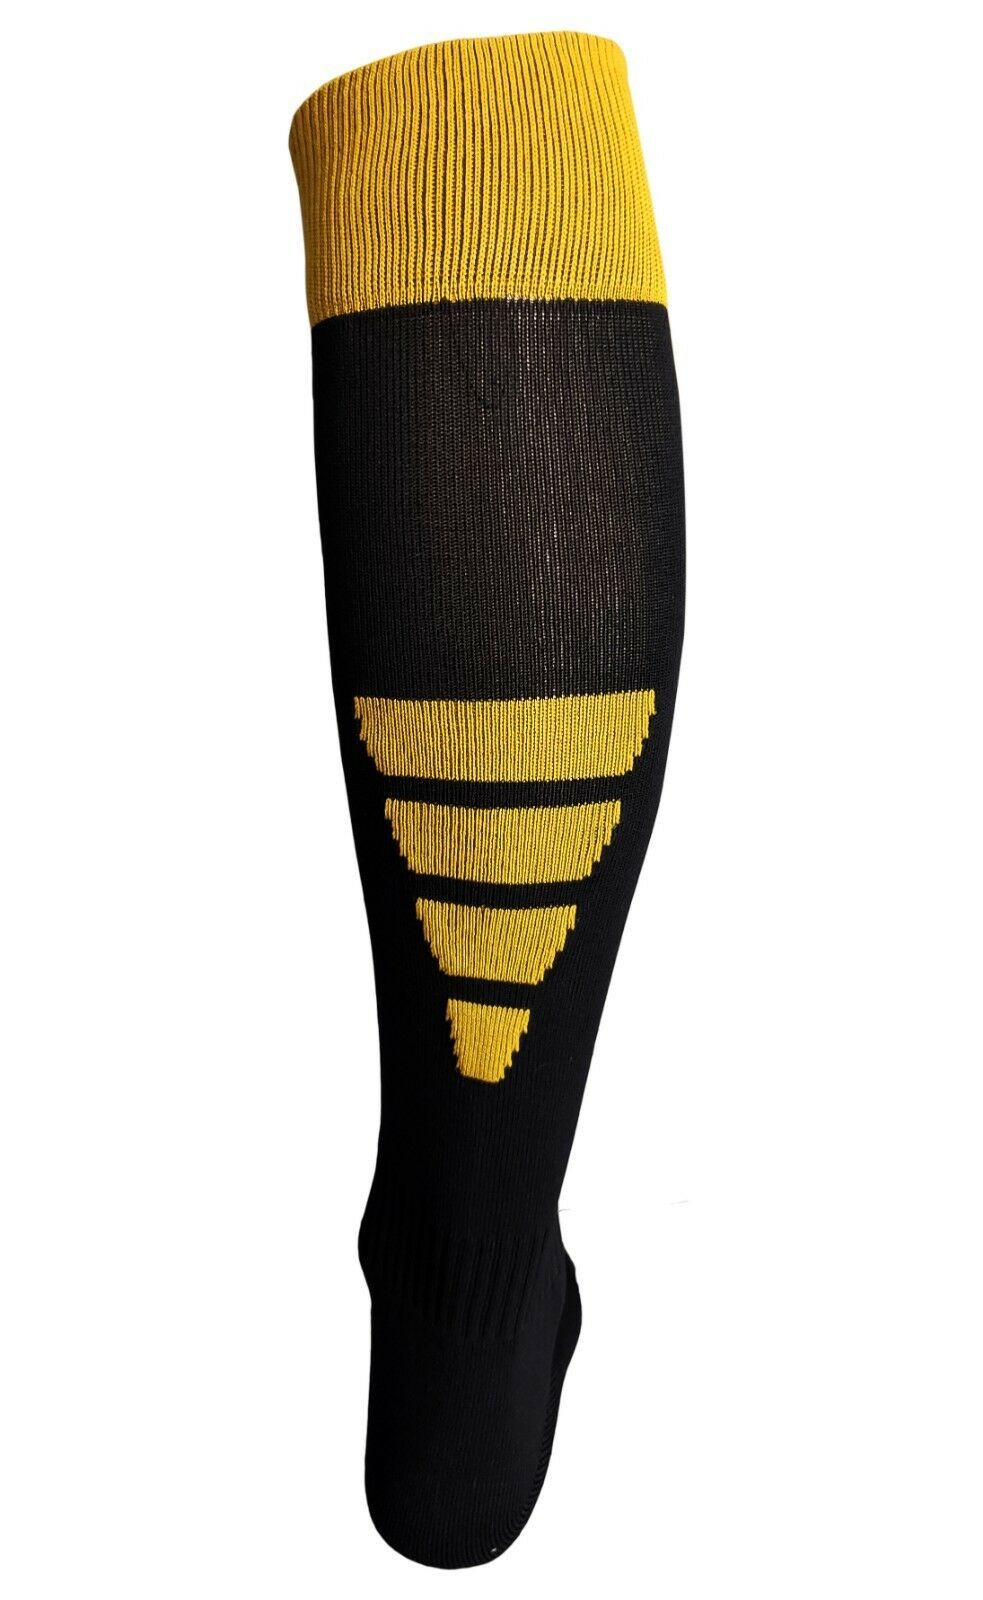 eescord soccer socks color Black and Yellow - Activewear Tops